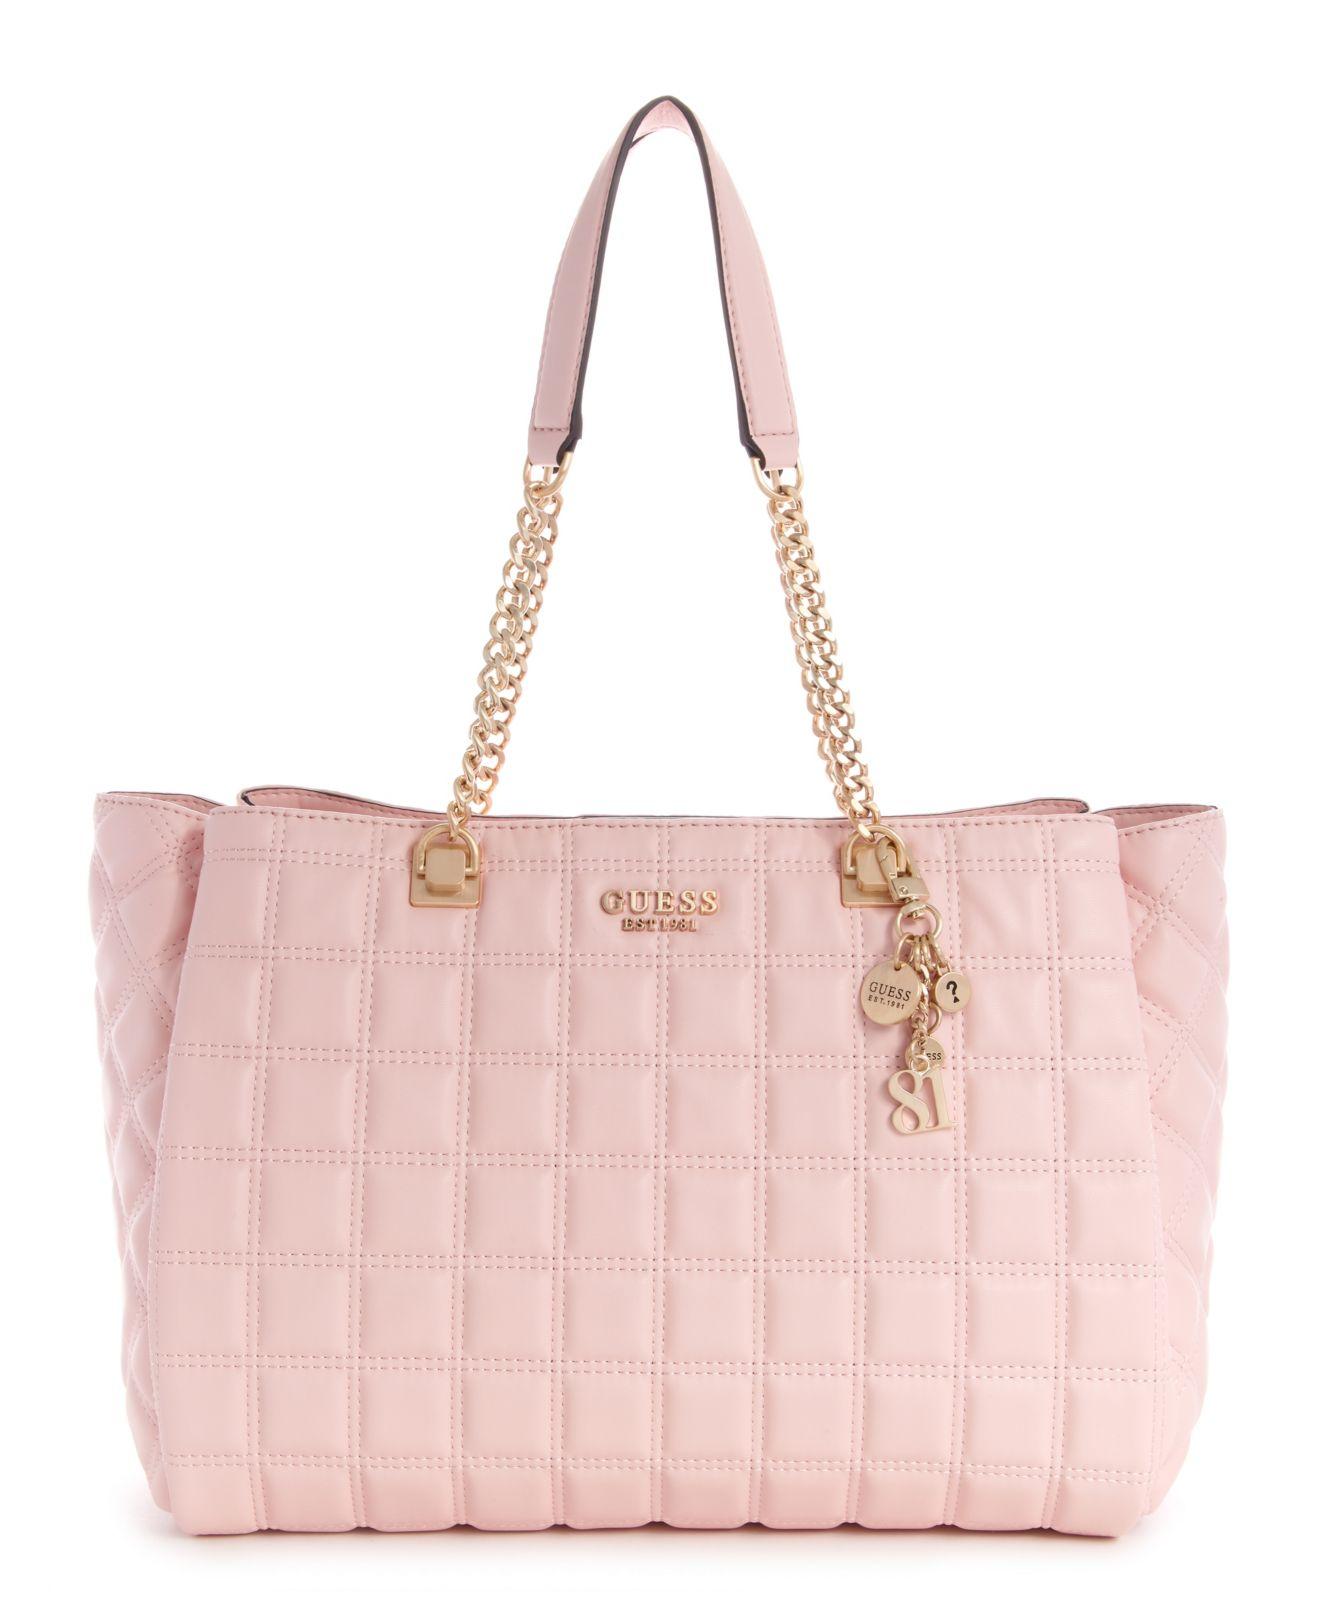 Guess Kamina Quilted Girlfriend Tote in Blush/Gold (Pink) - Lyst